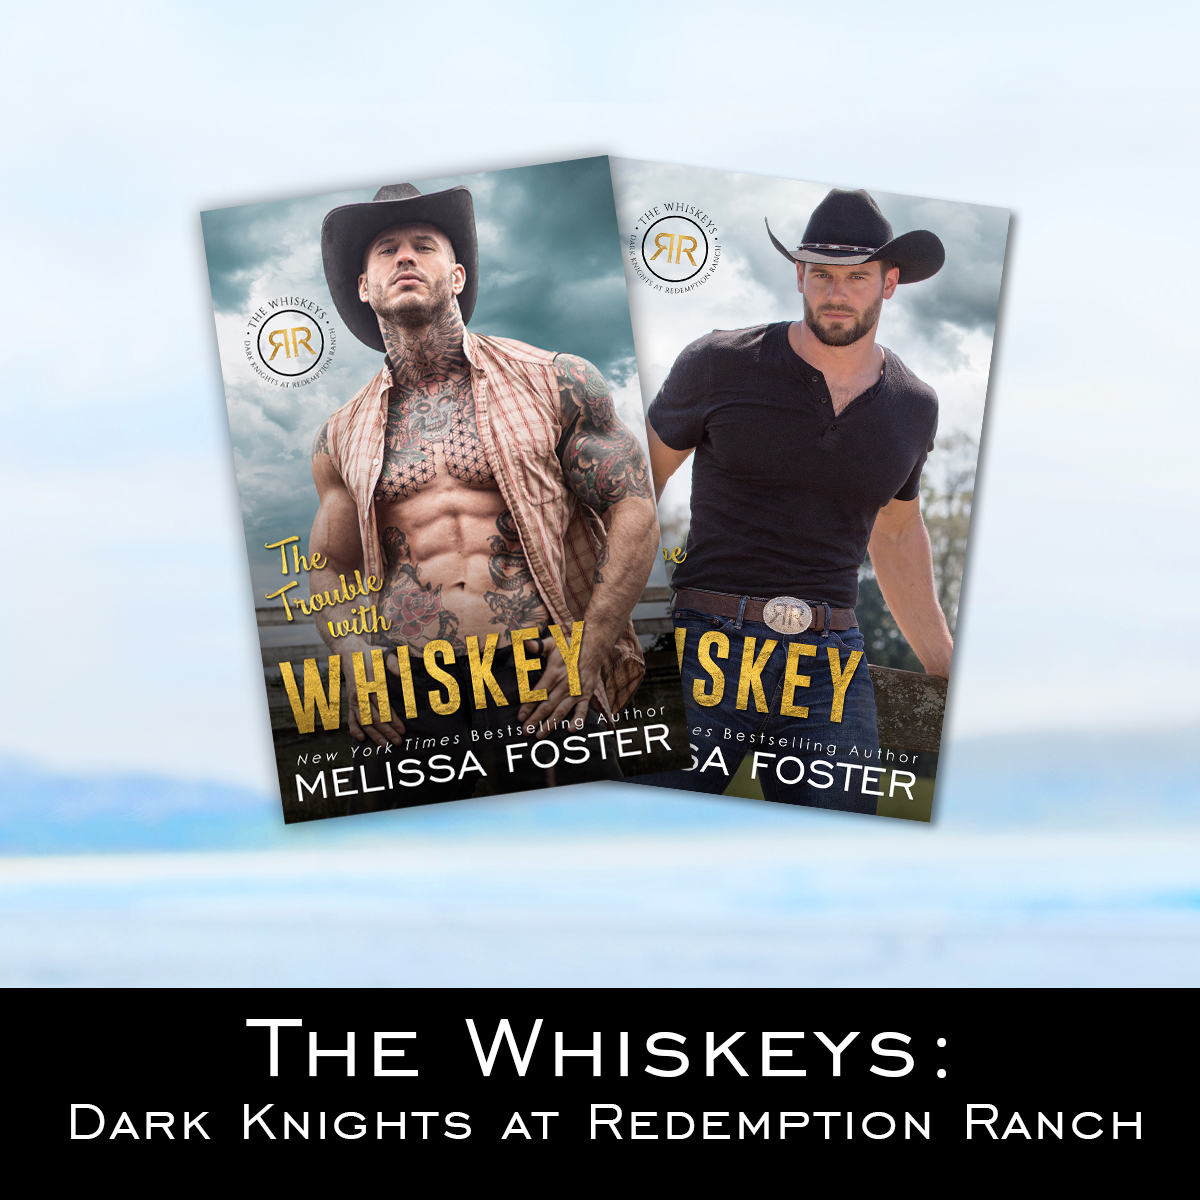 The Whiskeys: Dark Knights at Redemption Ranch series by Melissa Foster